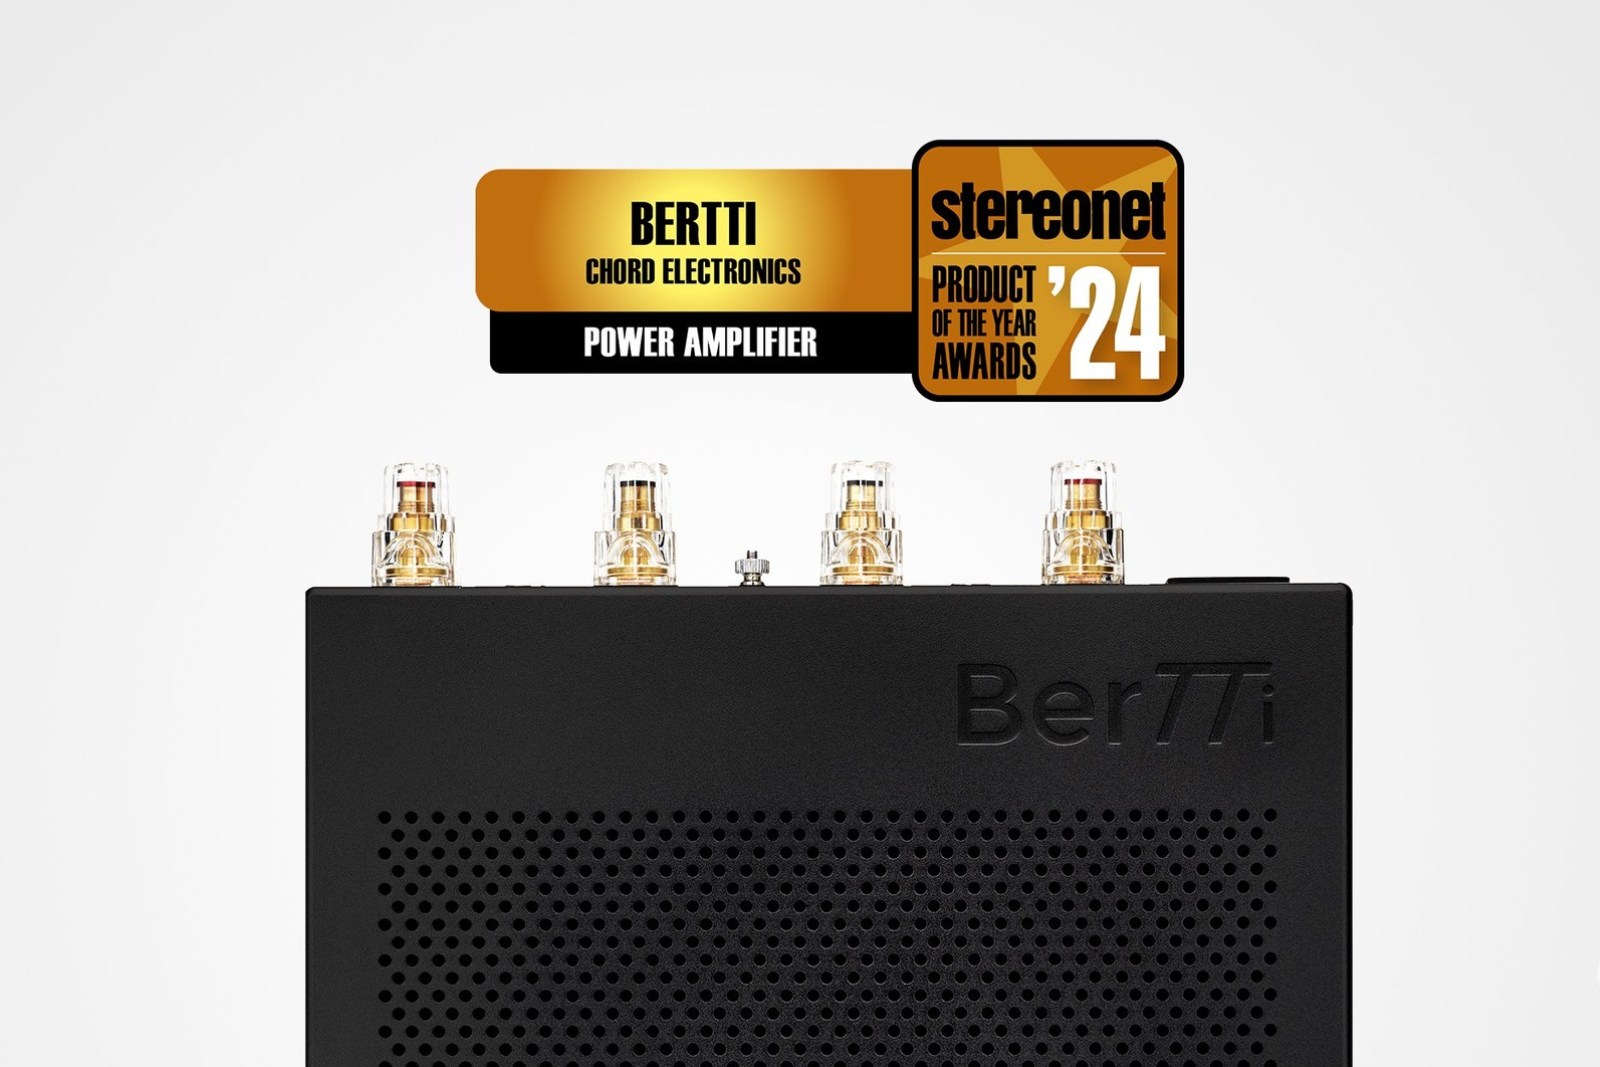 Chord Electronics BerTTi awarded best power amp by Stereonet UK